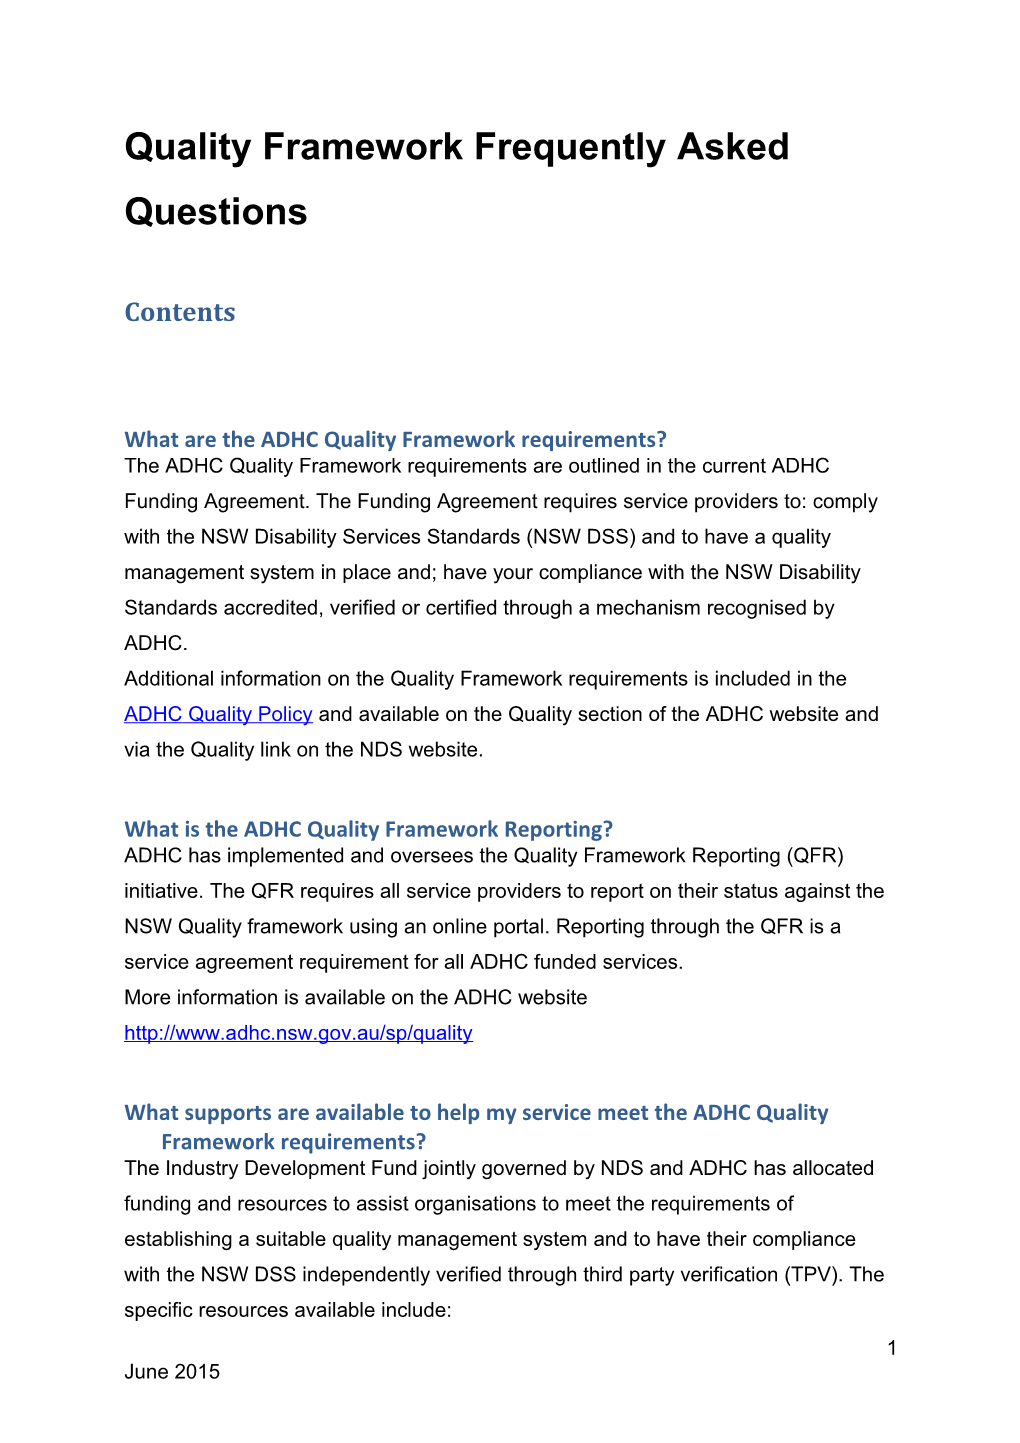 Quality Framework Frequently Asked Questions